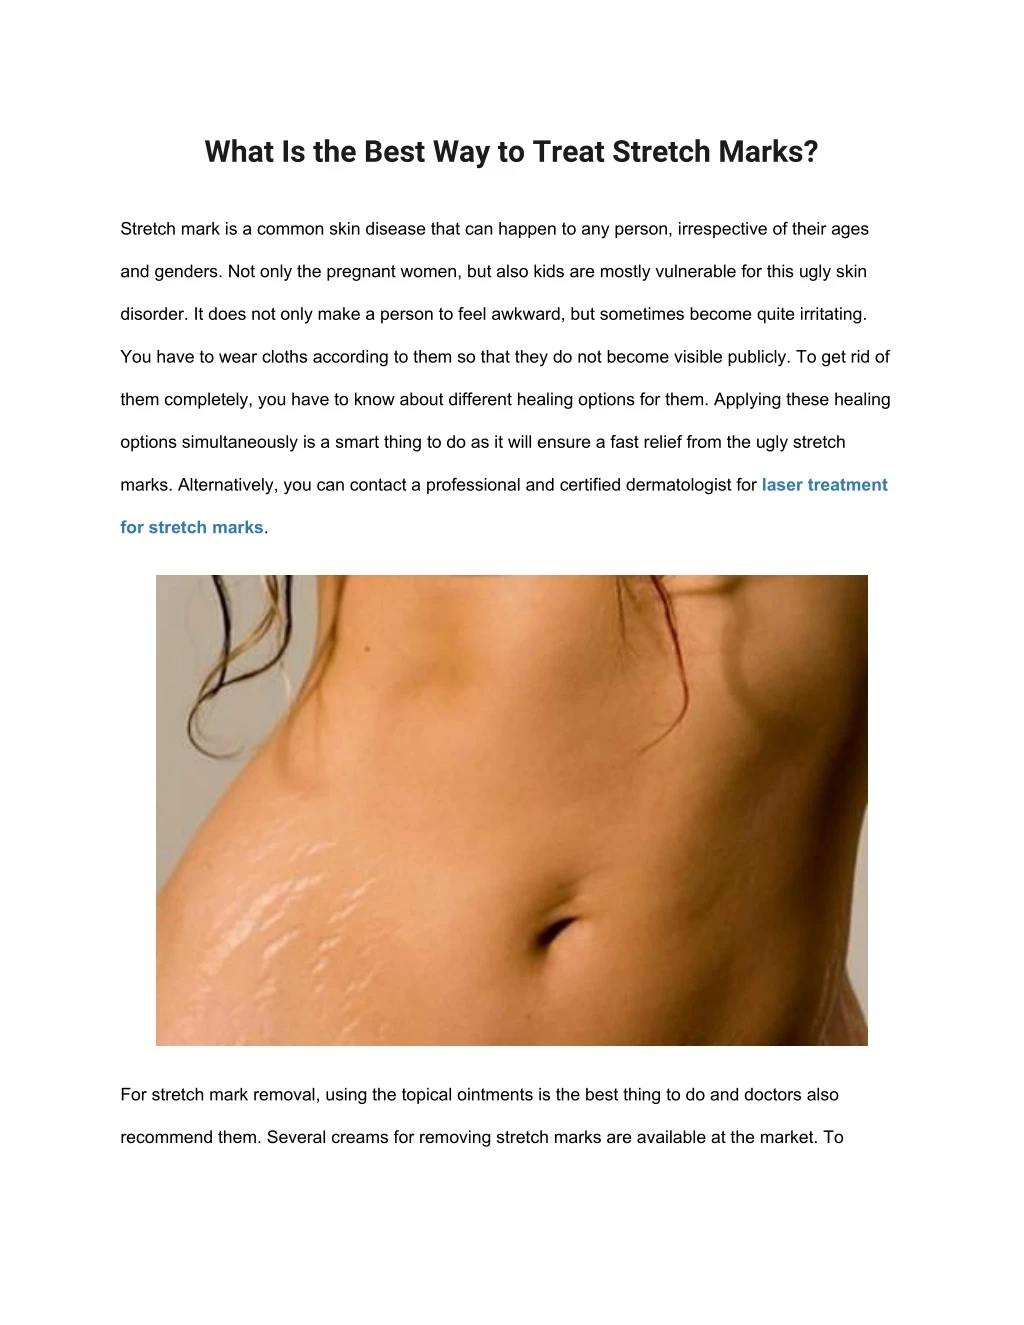 what is the best way to treat stretch marks